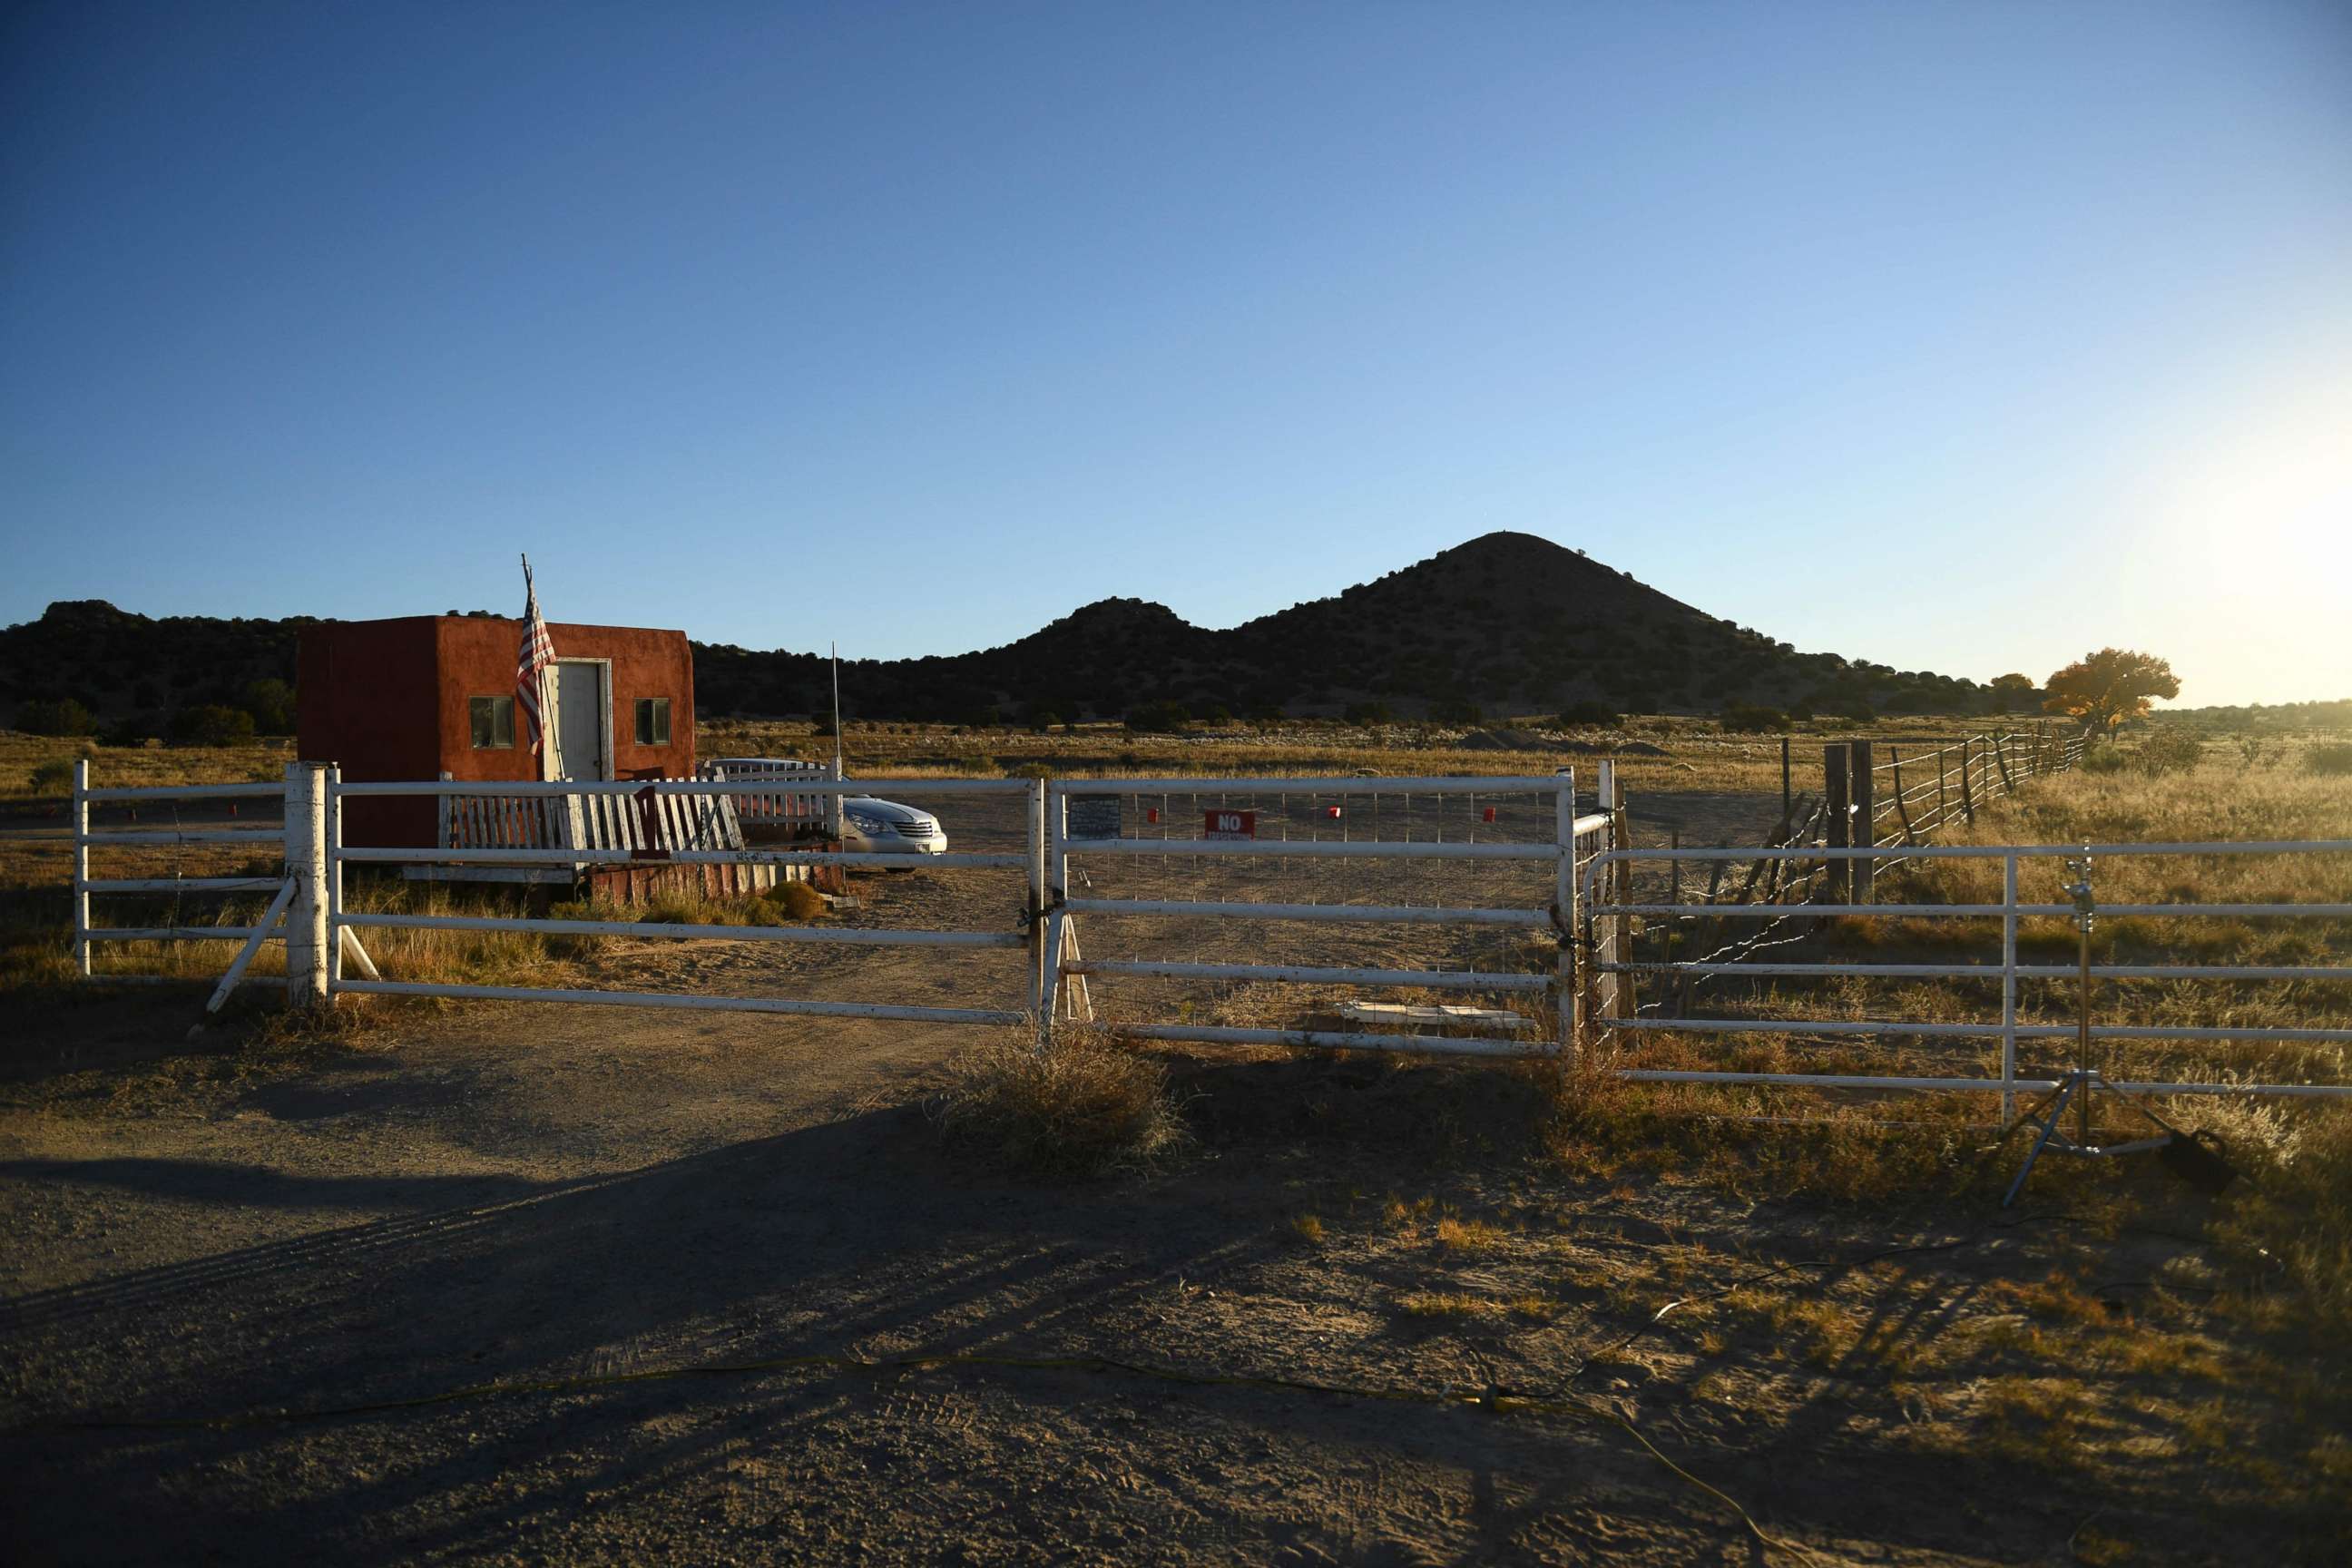 FILE PHOTO: The entrance to the Bonanza Creek Ranch where the movie &quot;Rust&quot; was filming near Santa Fe, New Mexico, is seen in this file photo taken on Oct. 29, 2021.